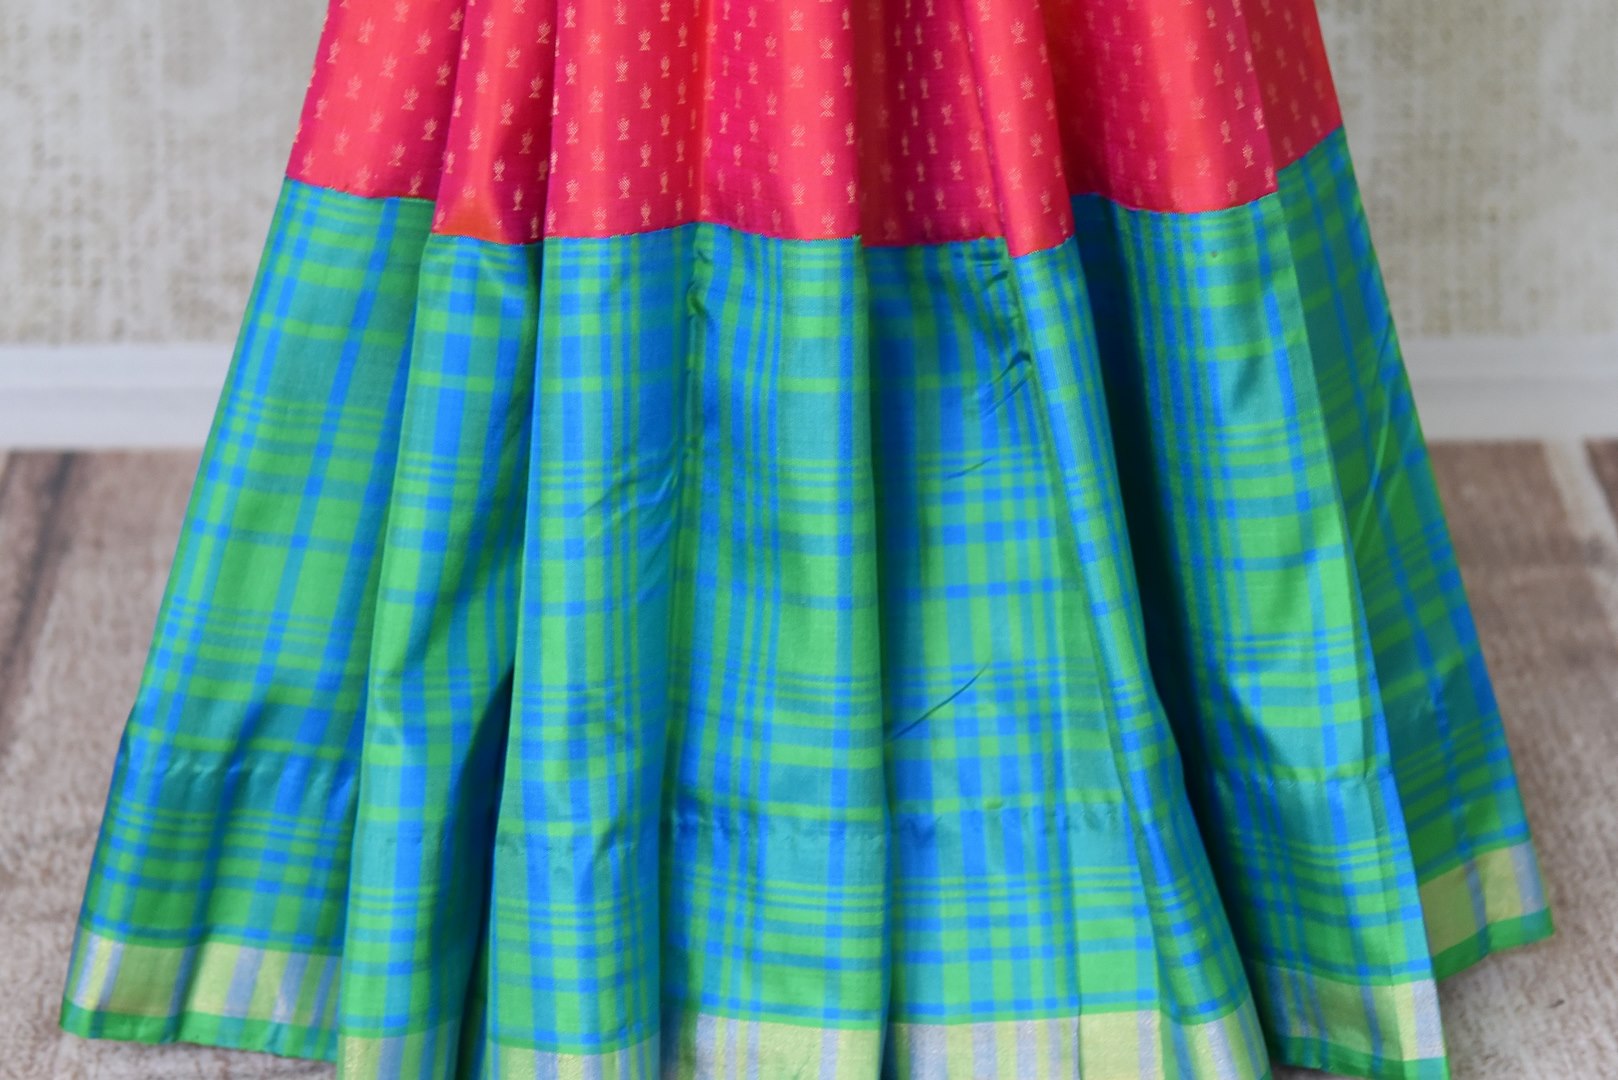 Shop pink Kanjeevaram saree online in USA with green blue check border. Channel your inner Indian diva with a range exquisite traditional Kanjivaram sarees from Pure Elegance Indian fashion store in USA. Shop now.-pleats